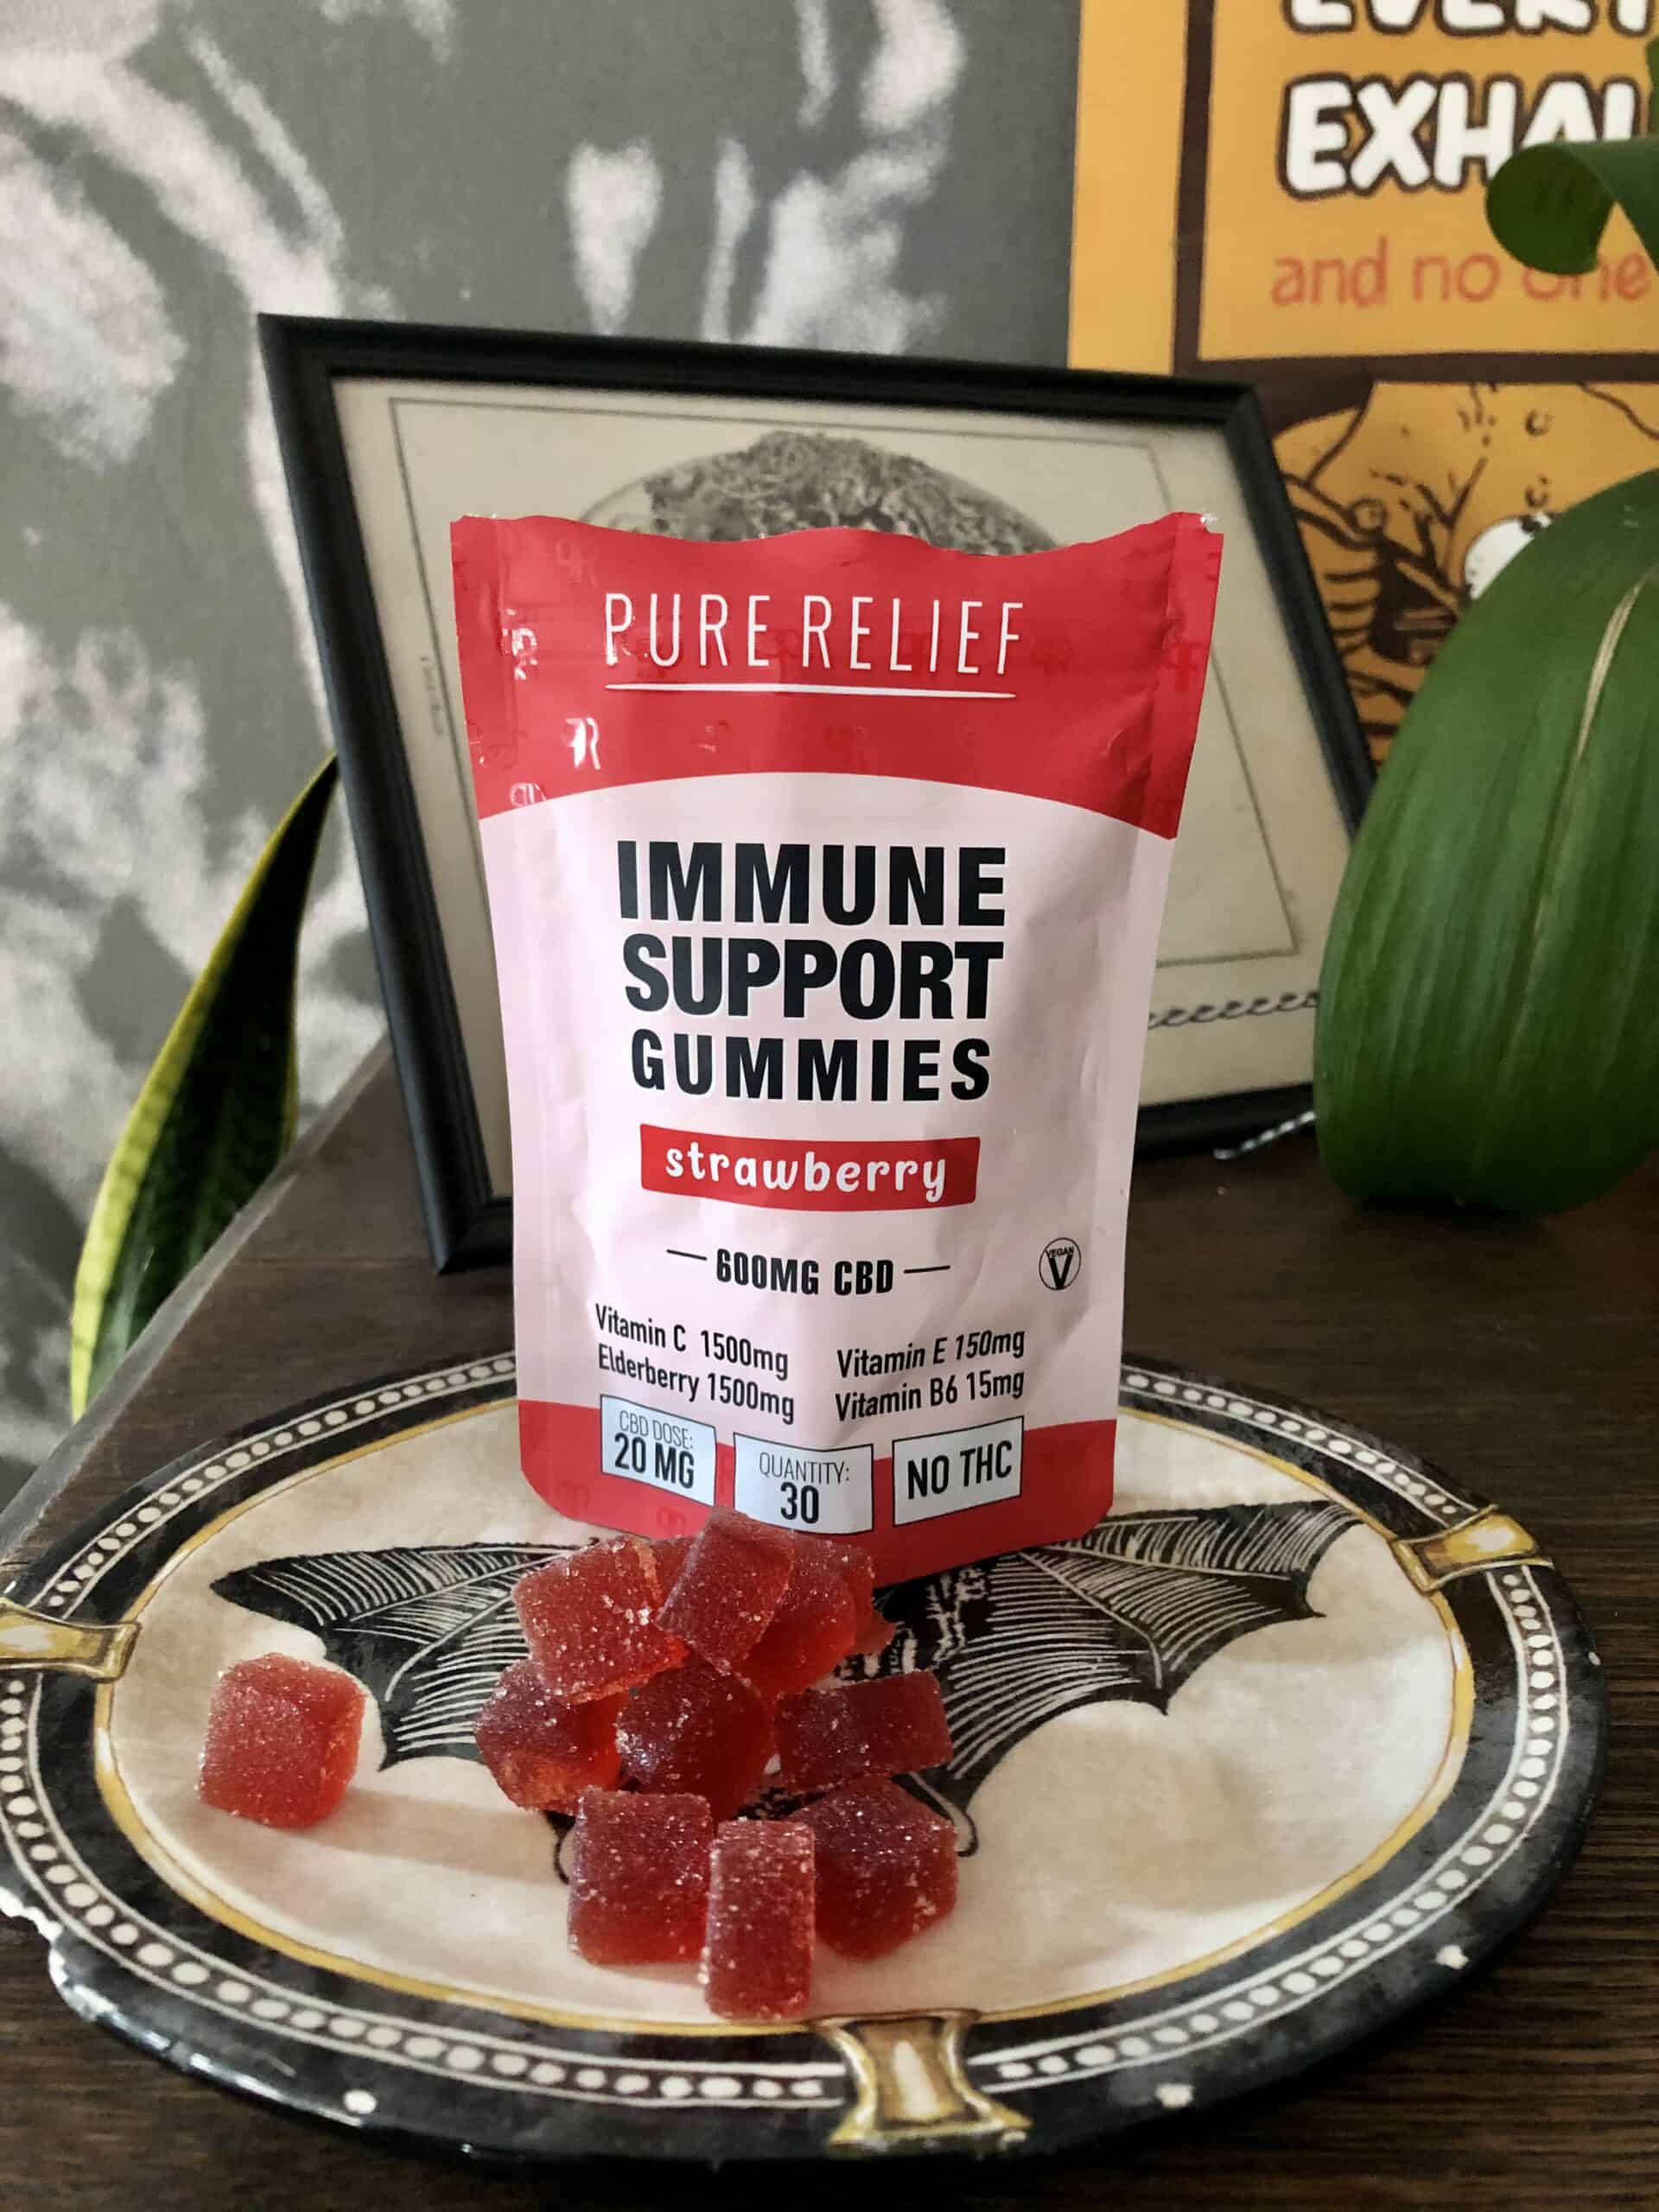 Pure Relief Immune Support Gummies Save On Cannabis Review Beauty Shot